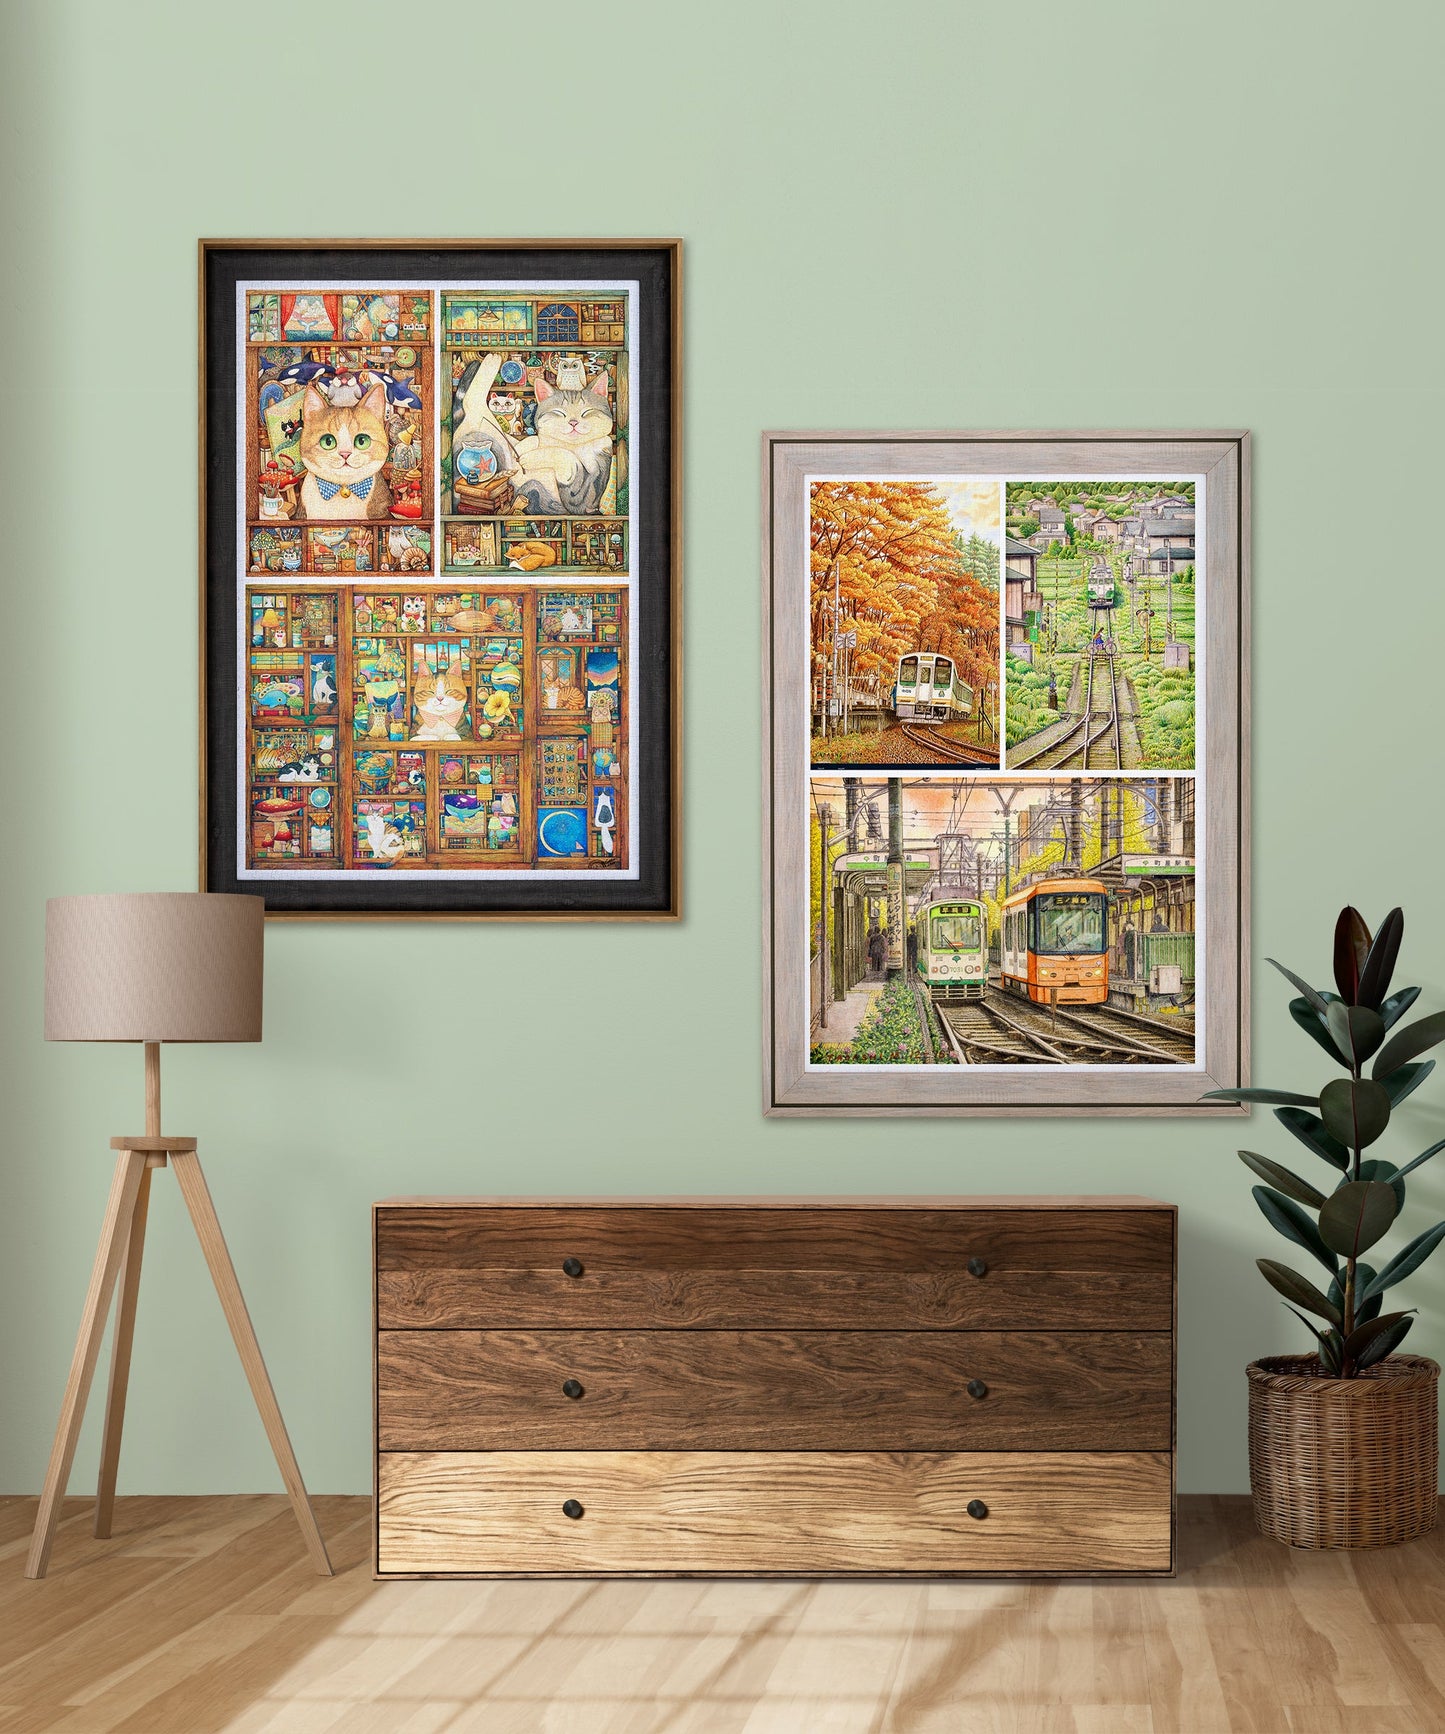 Chestnut Professional Jigsaw Puzzle Frame (Vertically Combined 2400pcs)